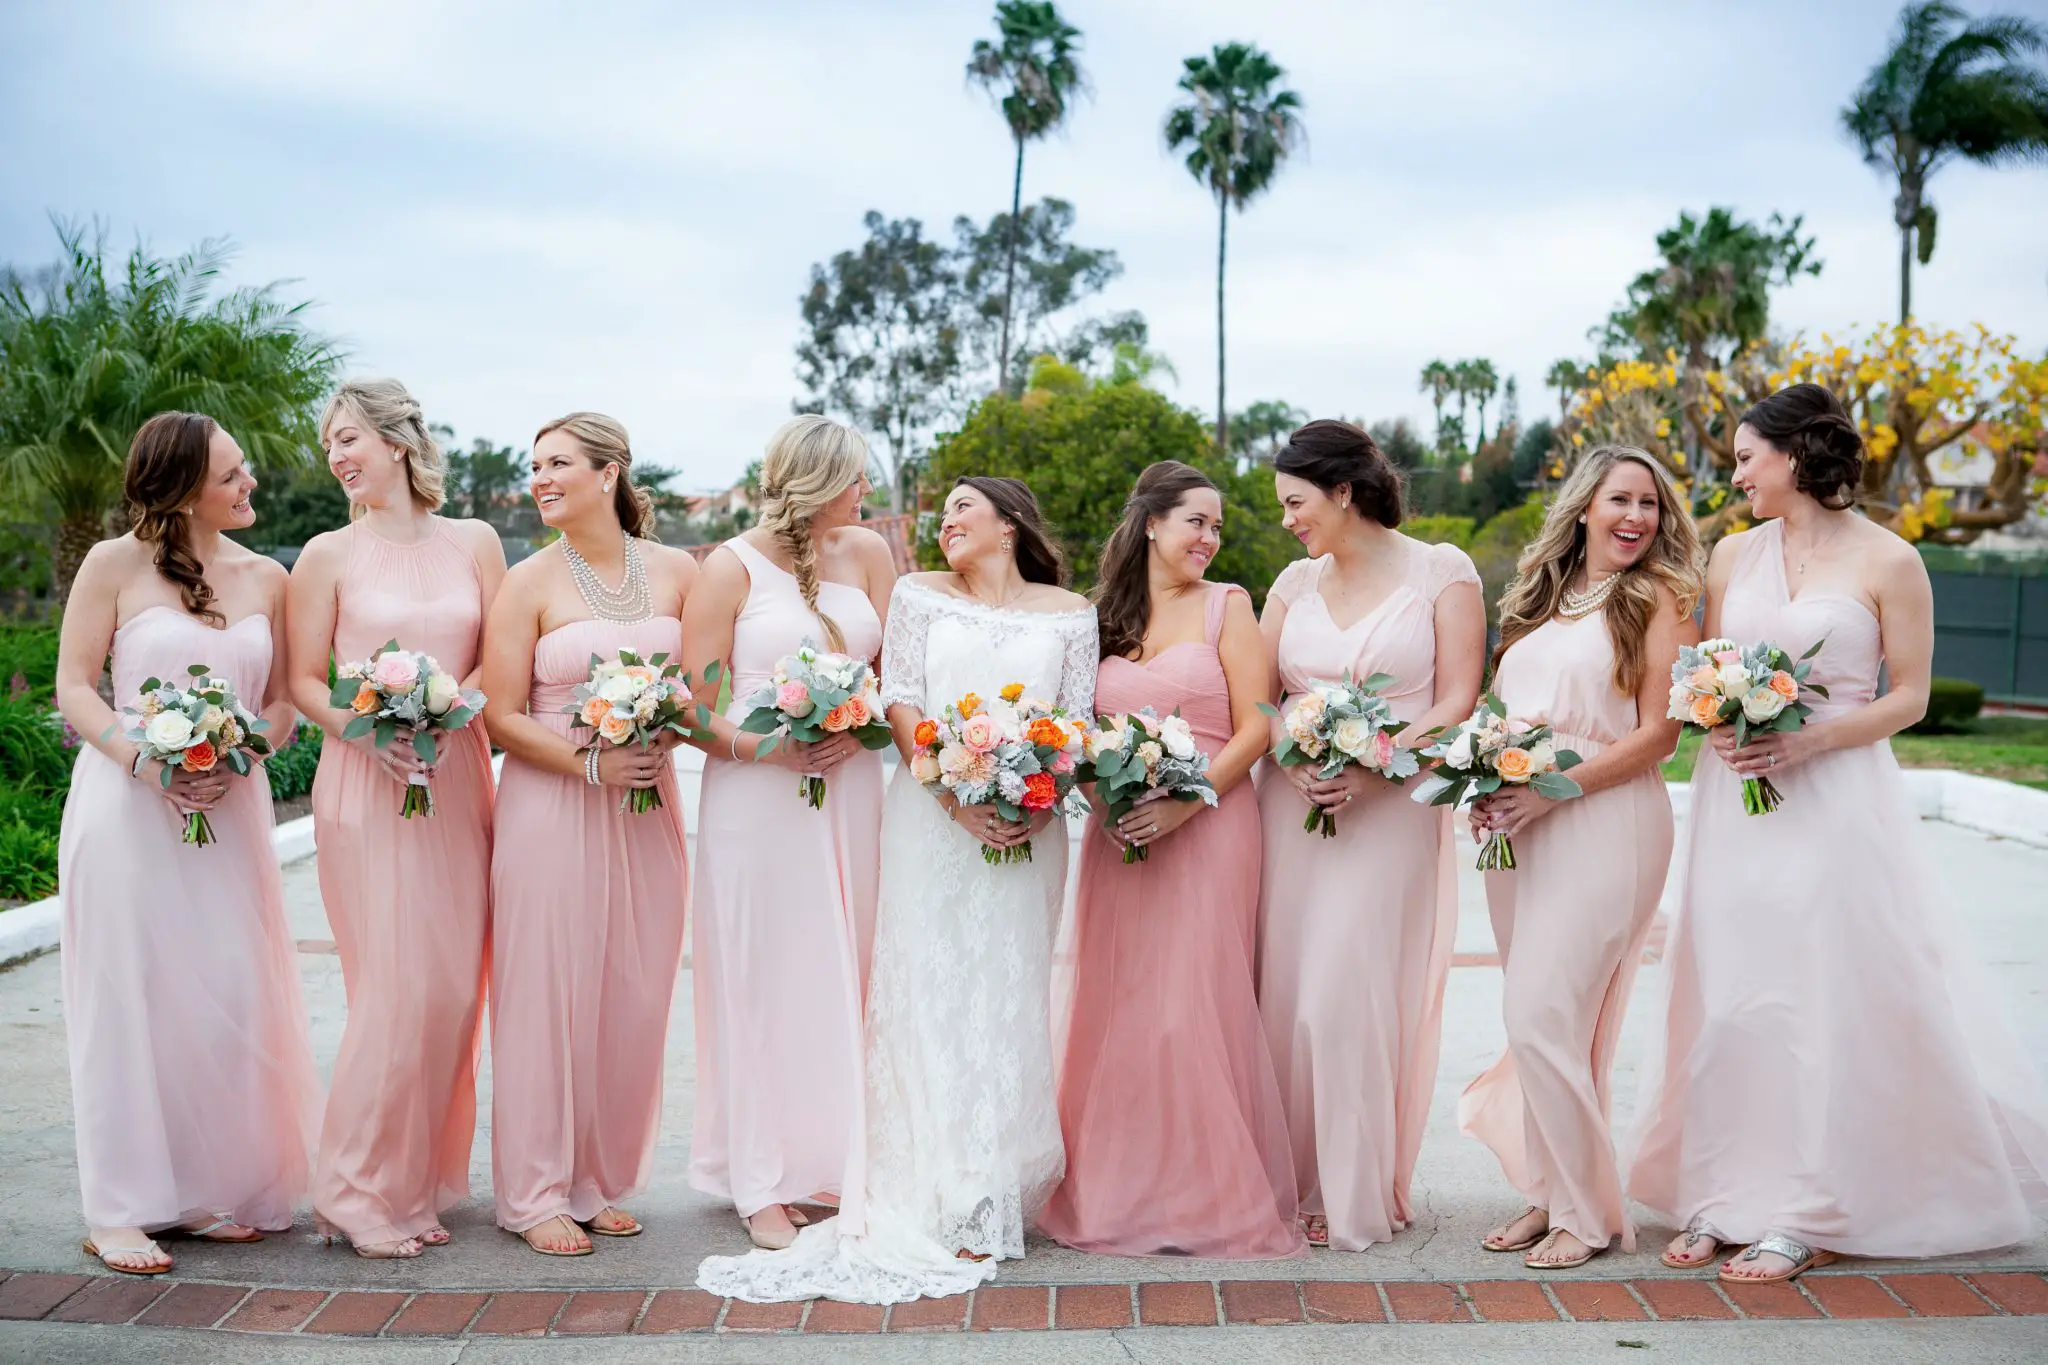 13 Tips for Nailing Mismatched Bridesmaid Dresses